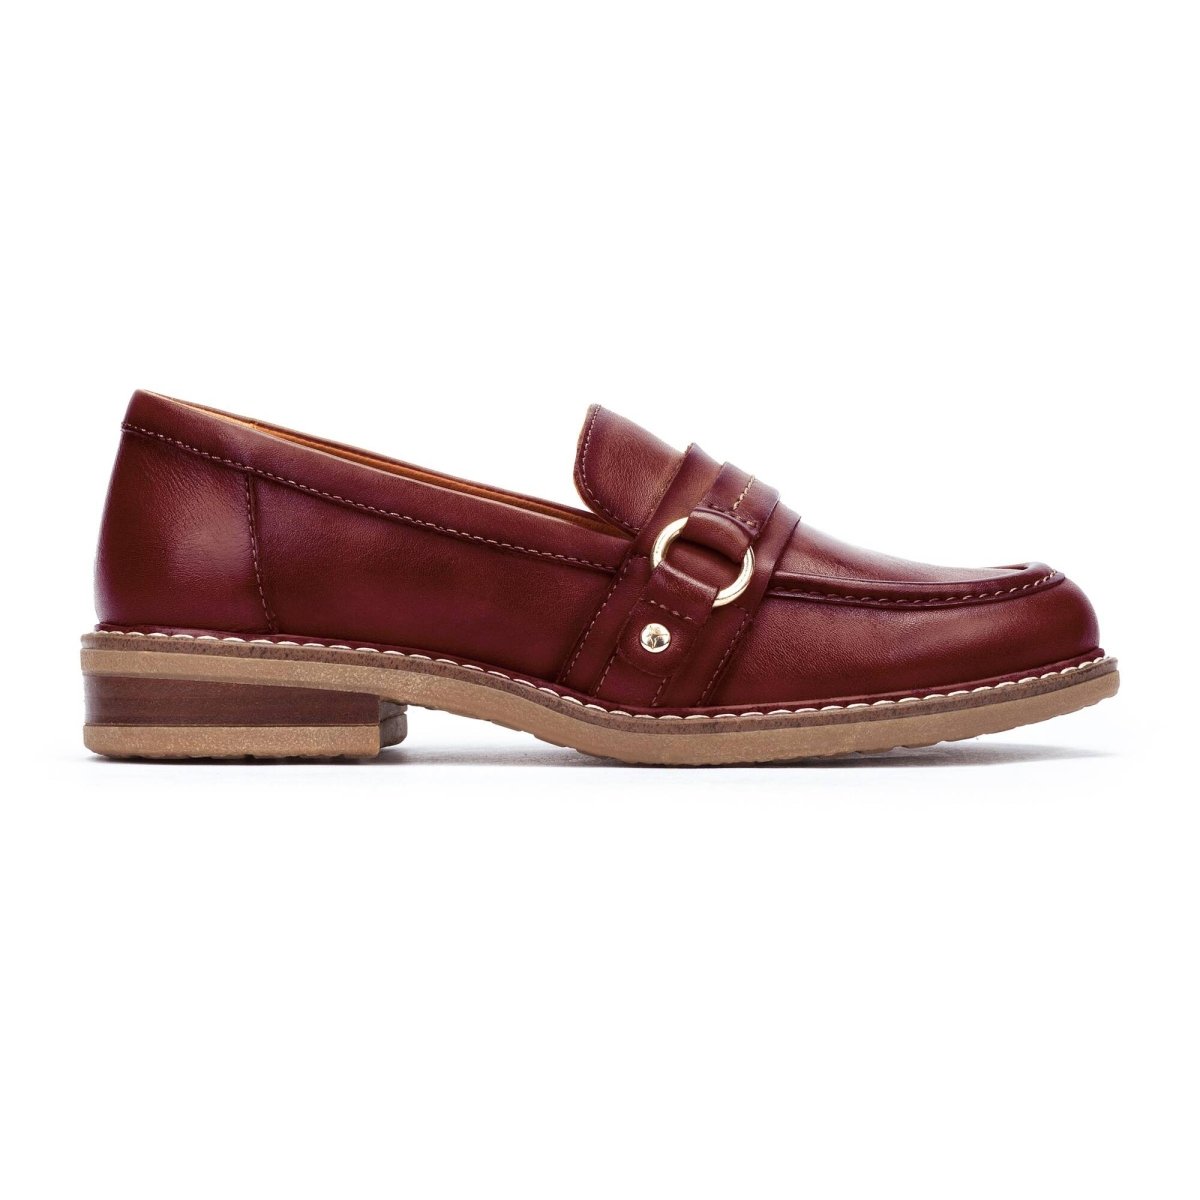 PIKOLINOS ALDAYA NAW8J-3693 WOMEN'S LOAFERS SHOES IN ARCILLA - TLW Shoes